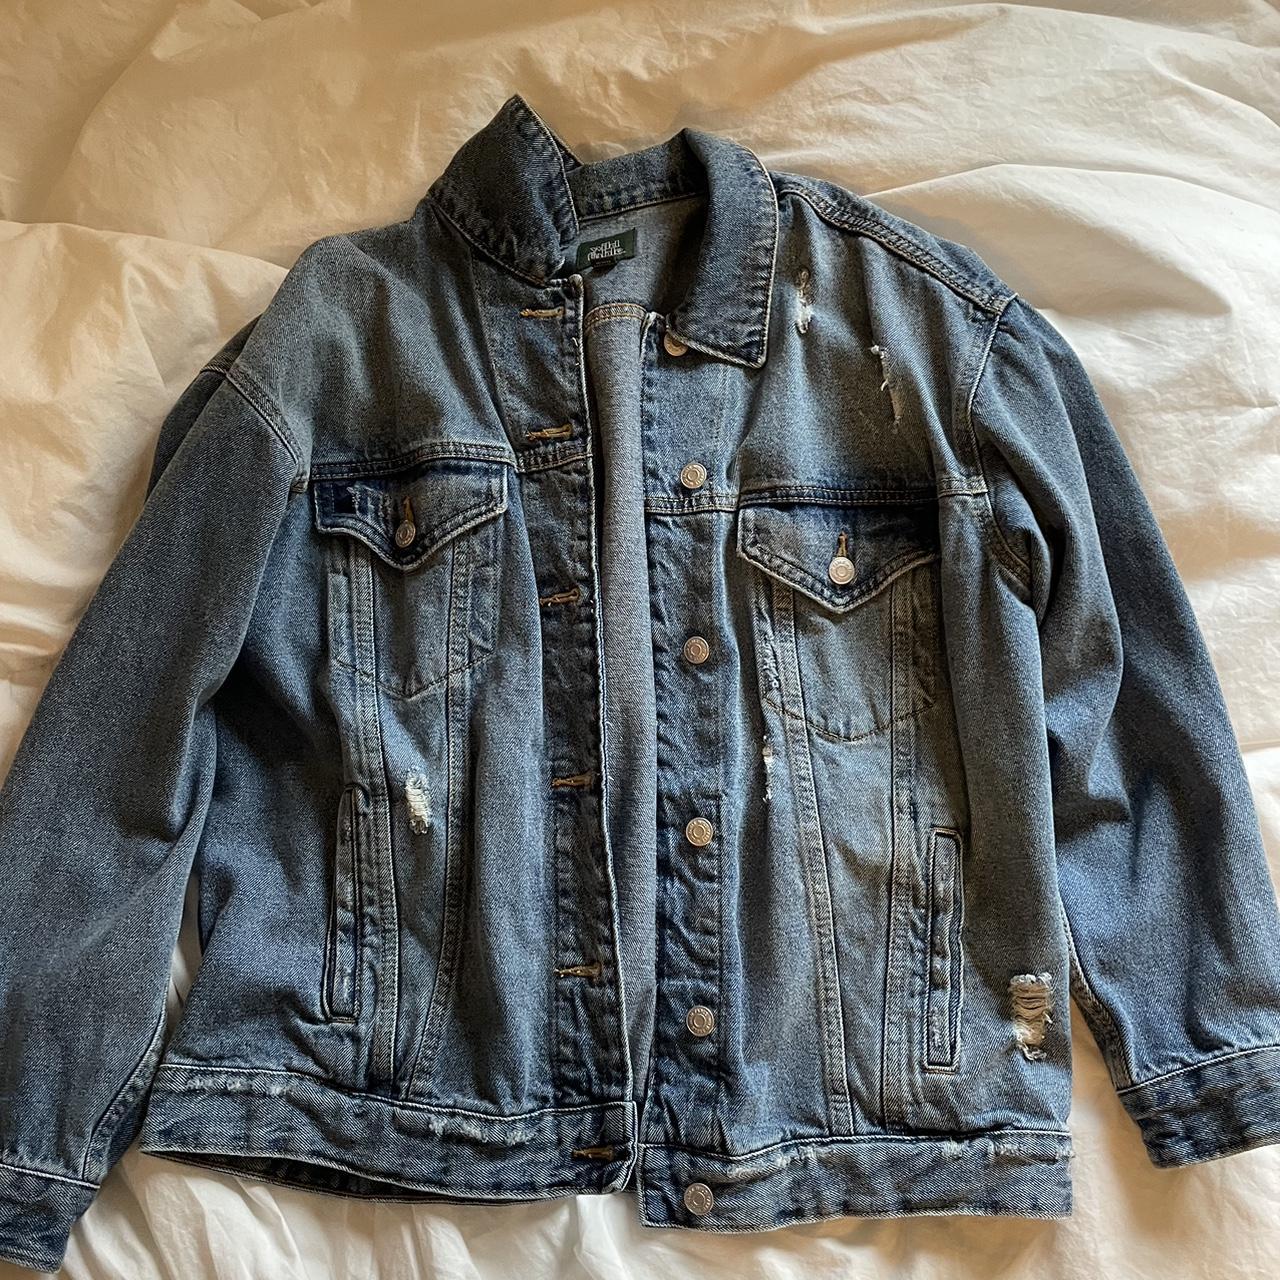 Wild fable jean jacket, hardly ever worn - Depop